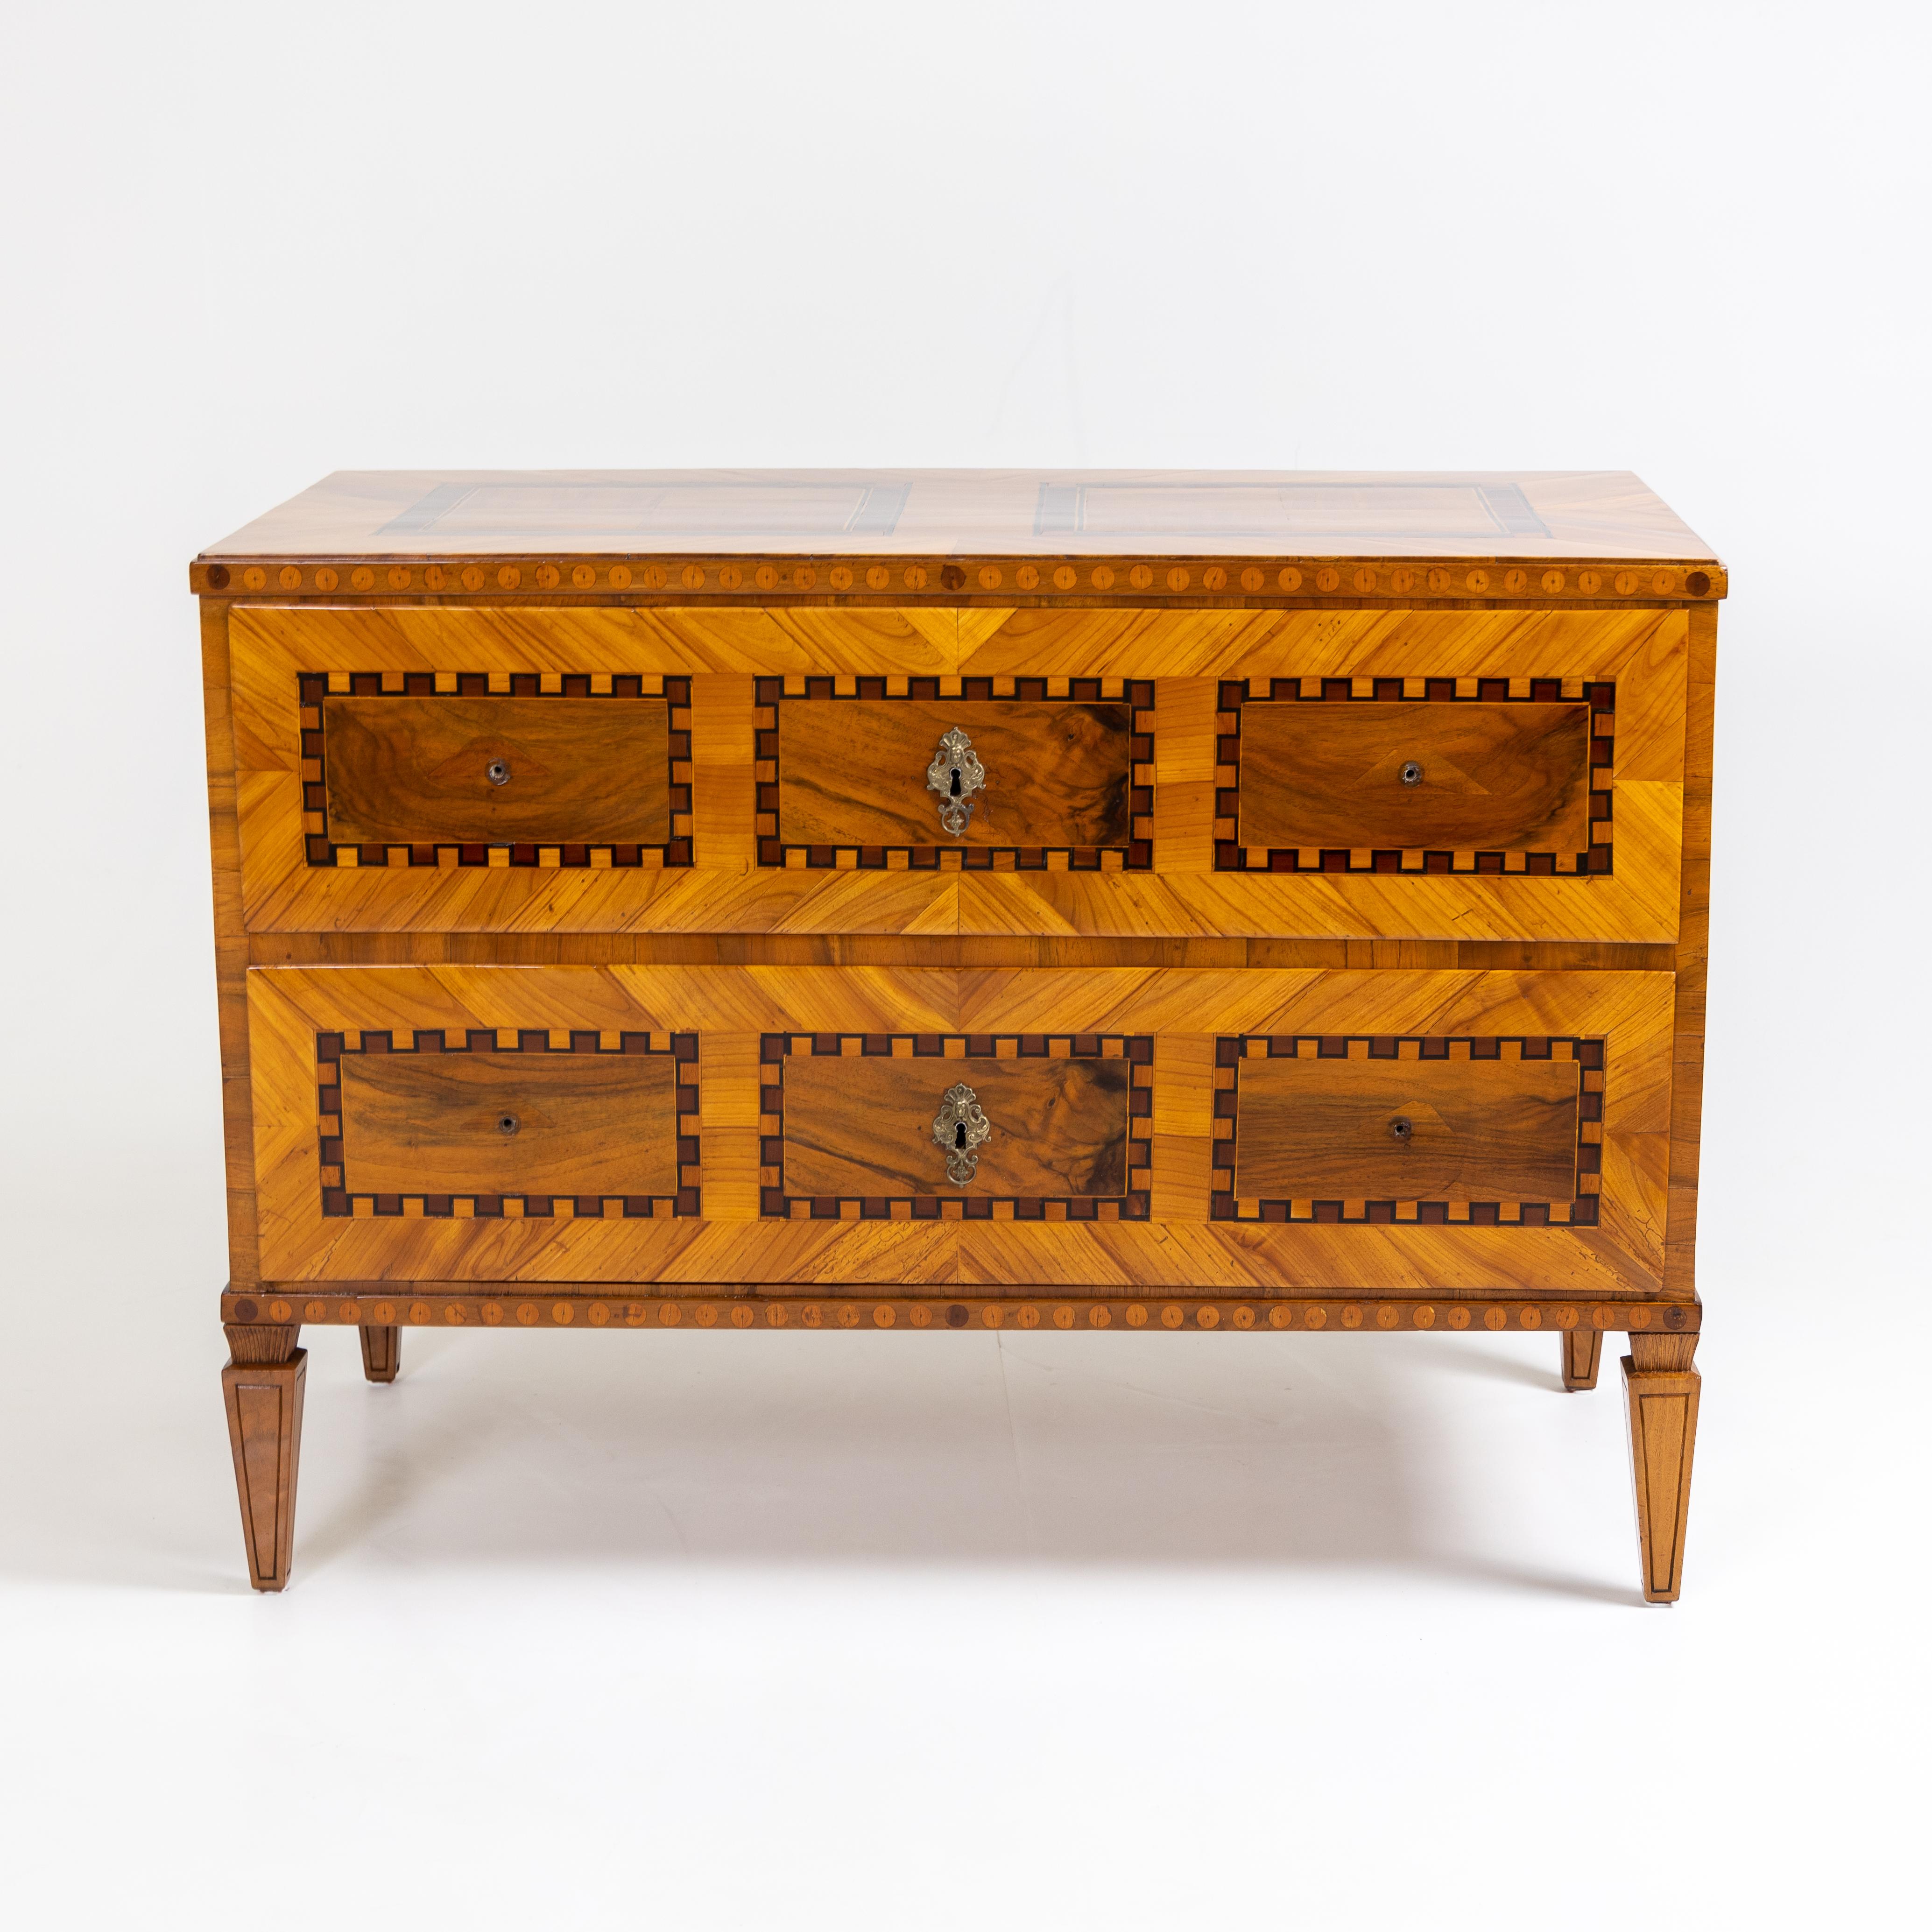 Classicistic two-bay chest of drawers on square pointed legs. Walnut and plum, veneered. The chest of drawers was expertly restored while preserving the patina.
  